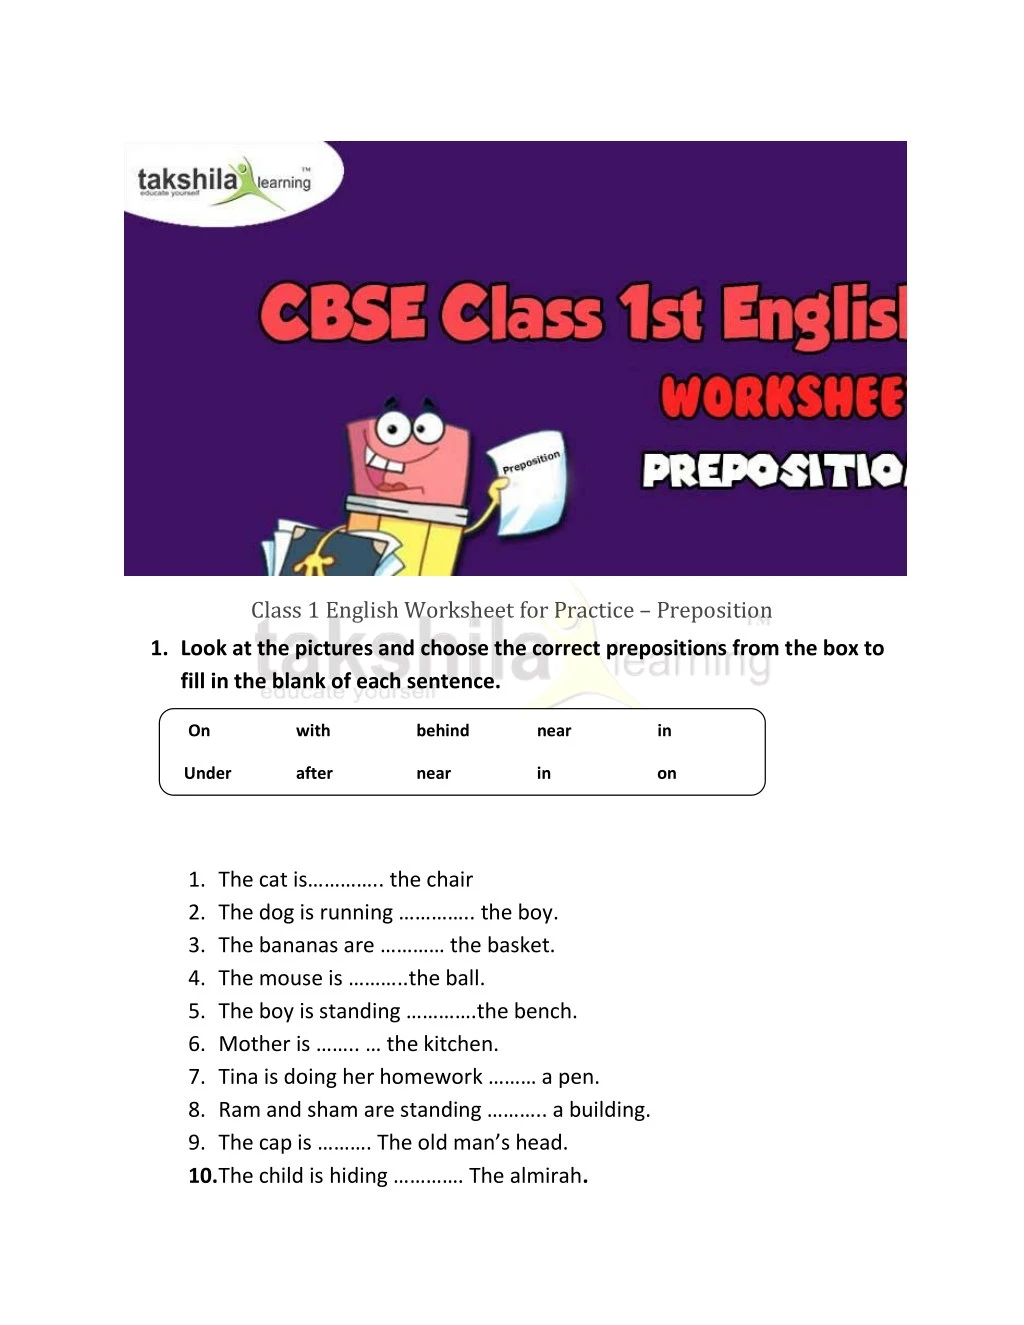 ppt class 1 english worksheet for practice preposition takshilalearning powerpoint presentation id 7826643